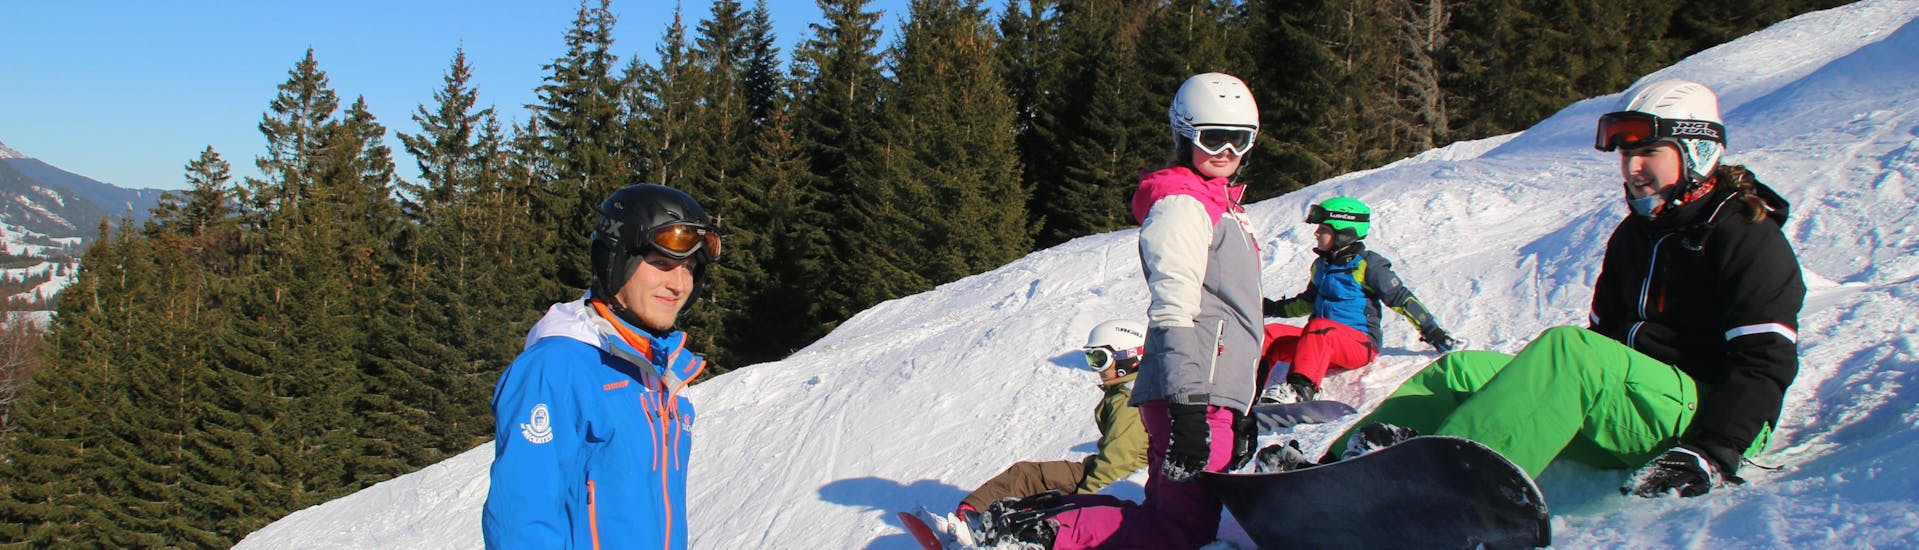 Kids Snowboarding Lessons (7-12 y.) + Hire Package with Ski &amp; Snowboard School Ostrachtal - Hero image